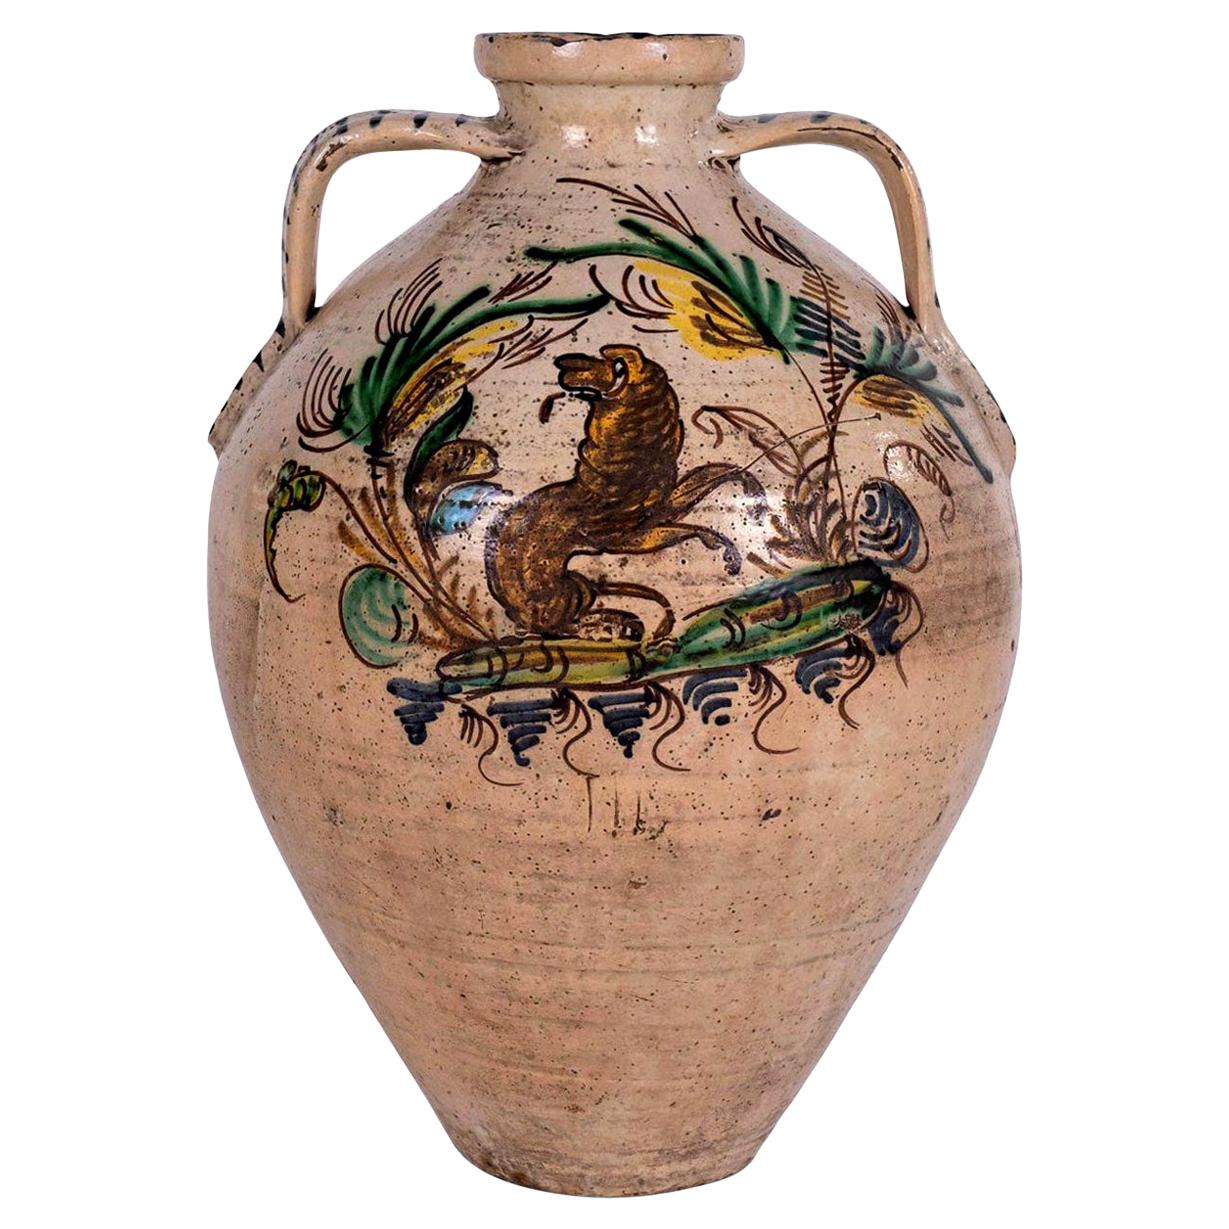 19th century Spanish Puente del Arzobispo glazed ceramic jar dated 1844 and marked for 